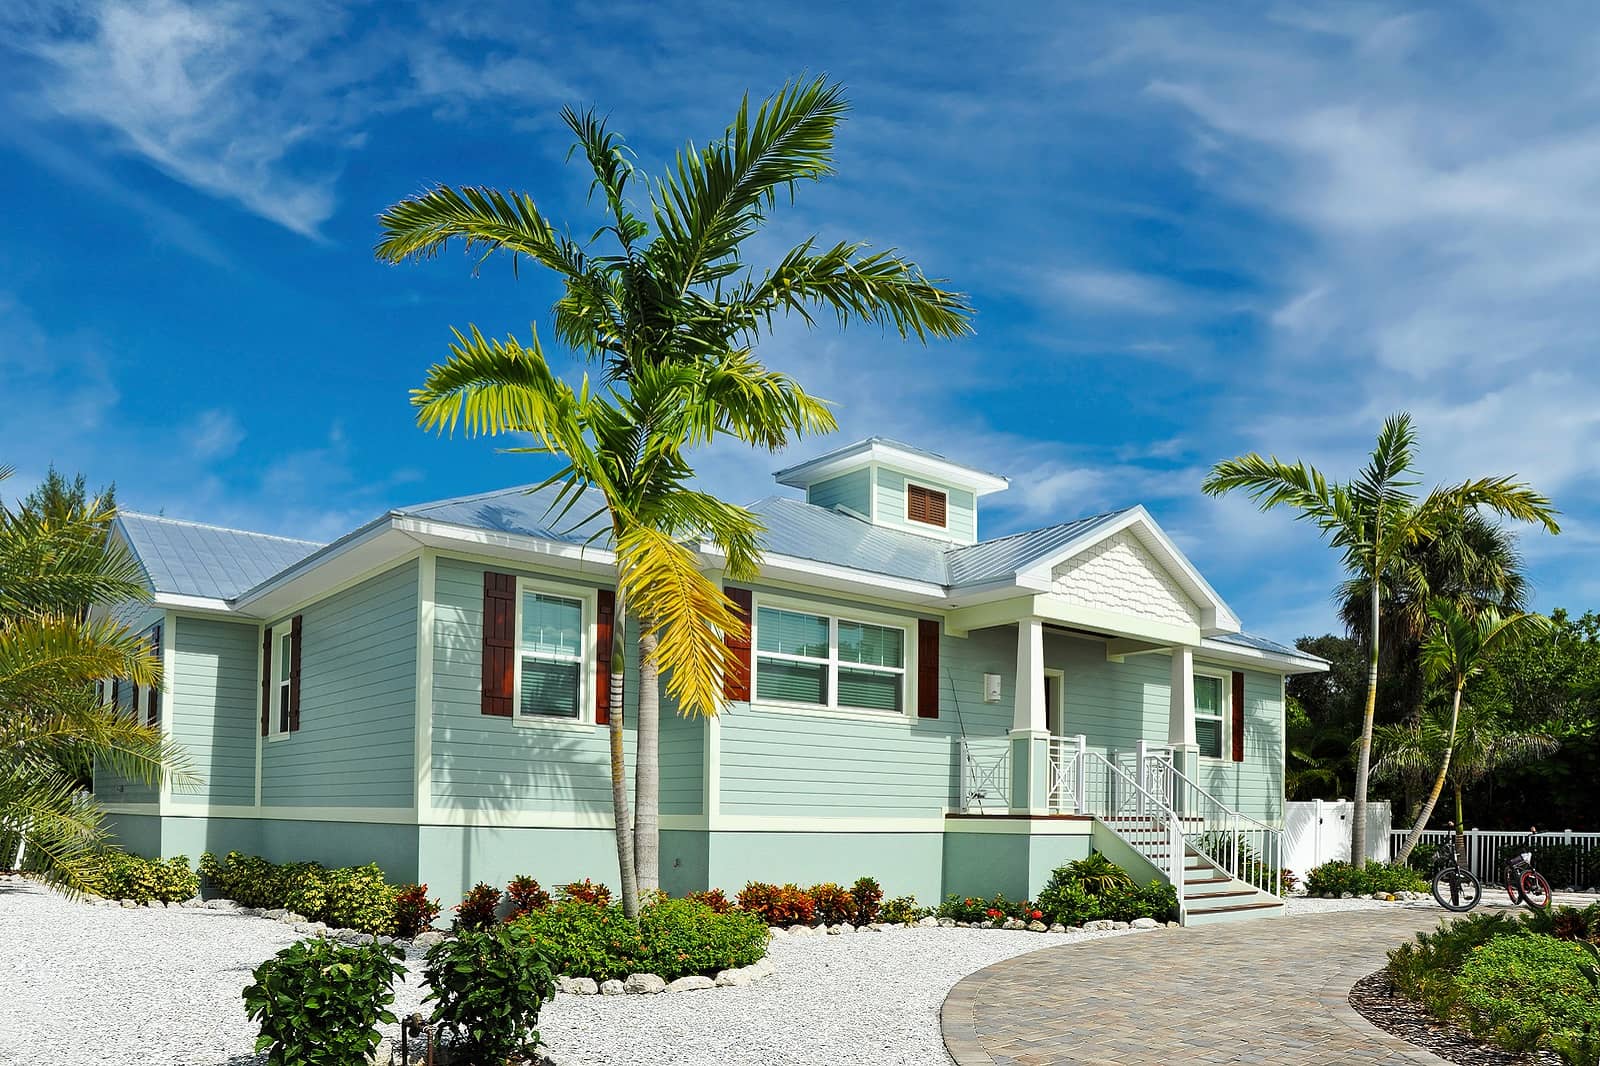 How to Evaluate Vacation Rental Potential Before Buying